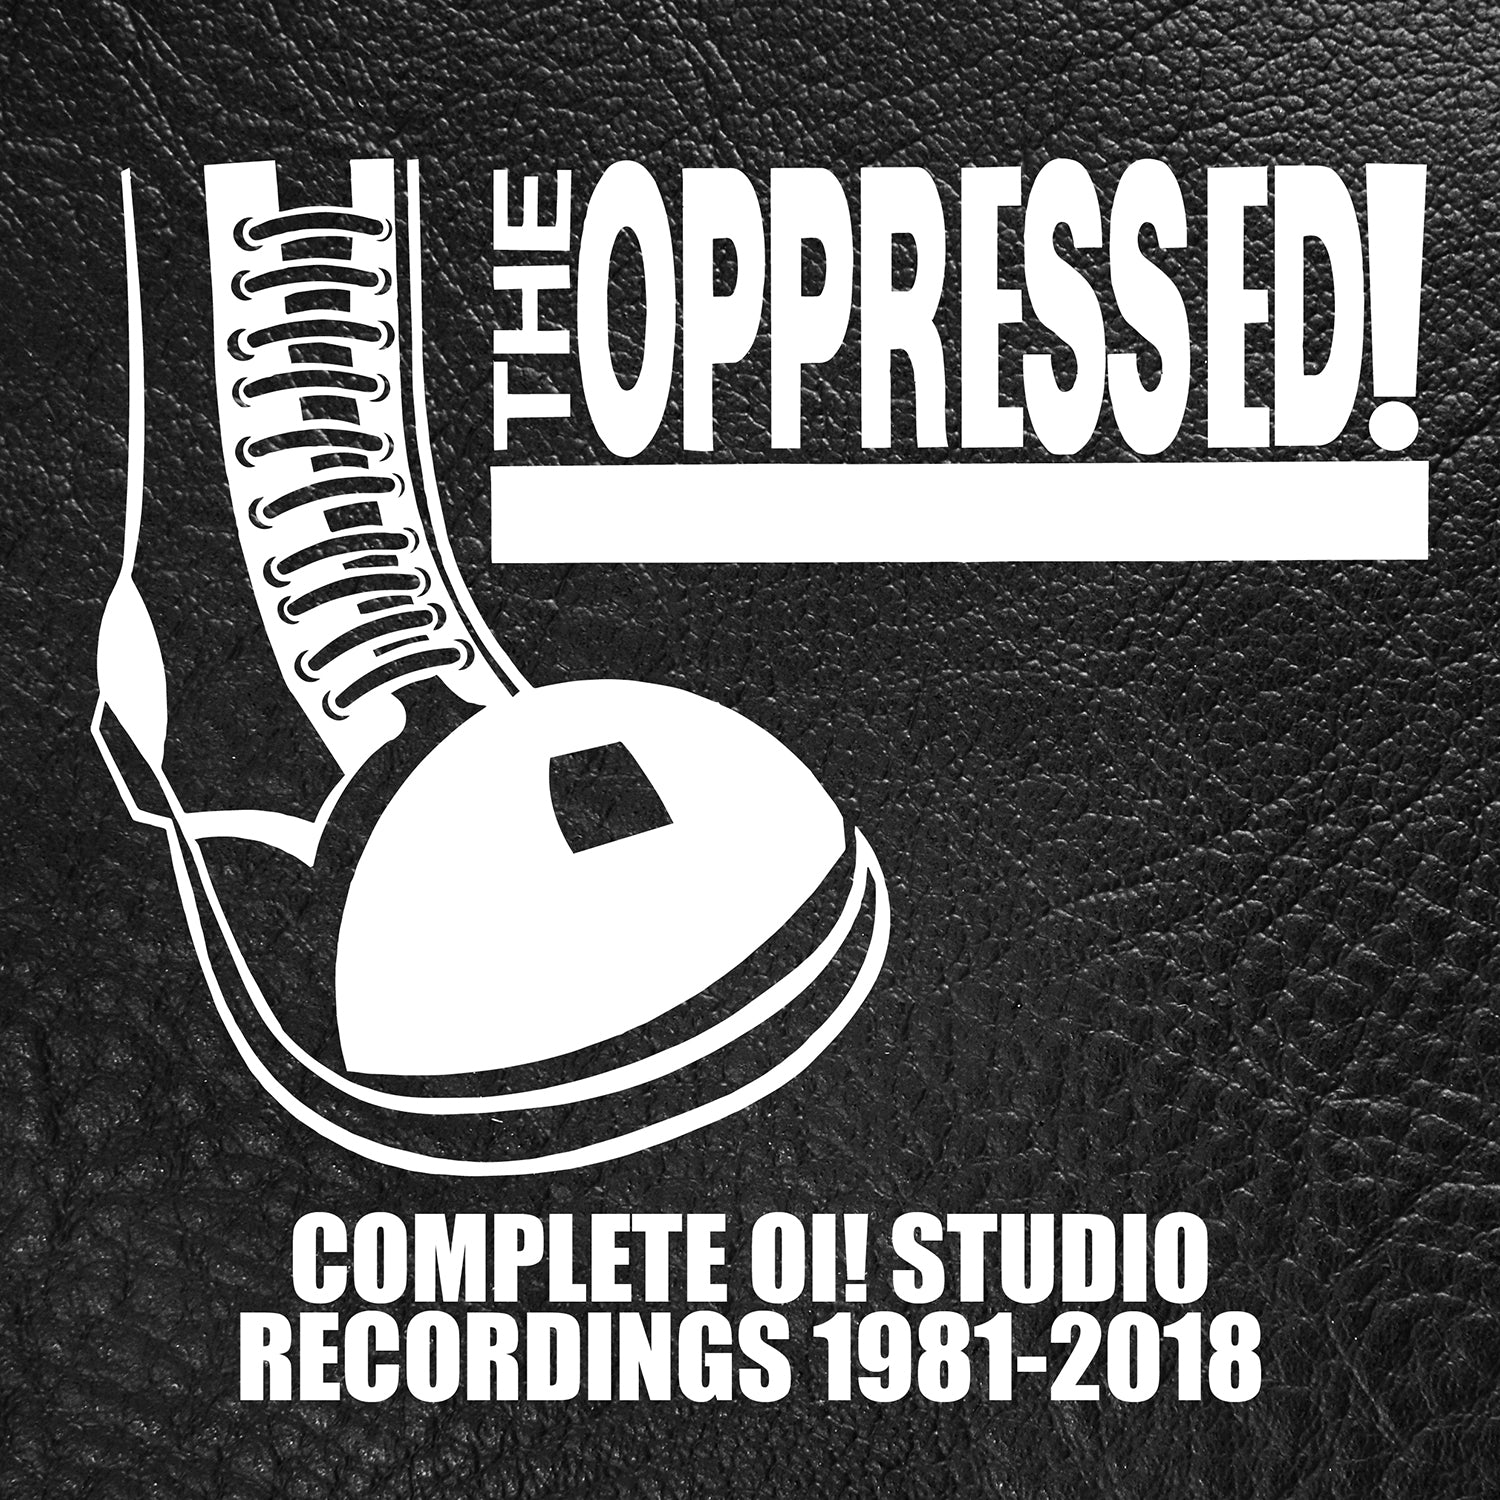 The Oppressed: Complete Oi! Studio Recordings 1981-2018 (4 CD Box Set - Imported)